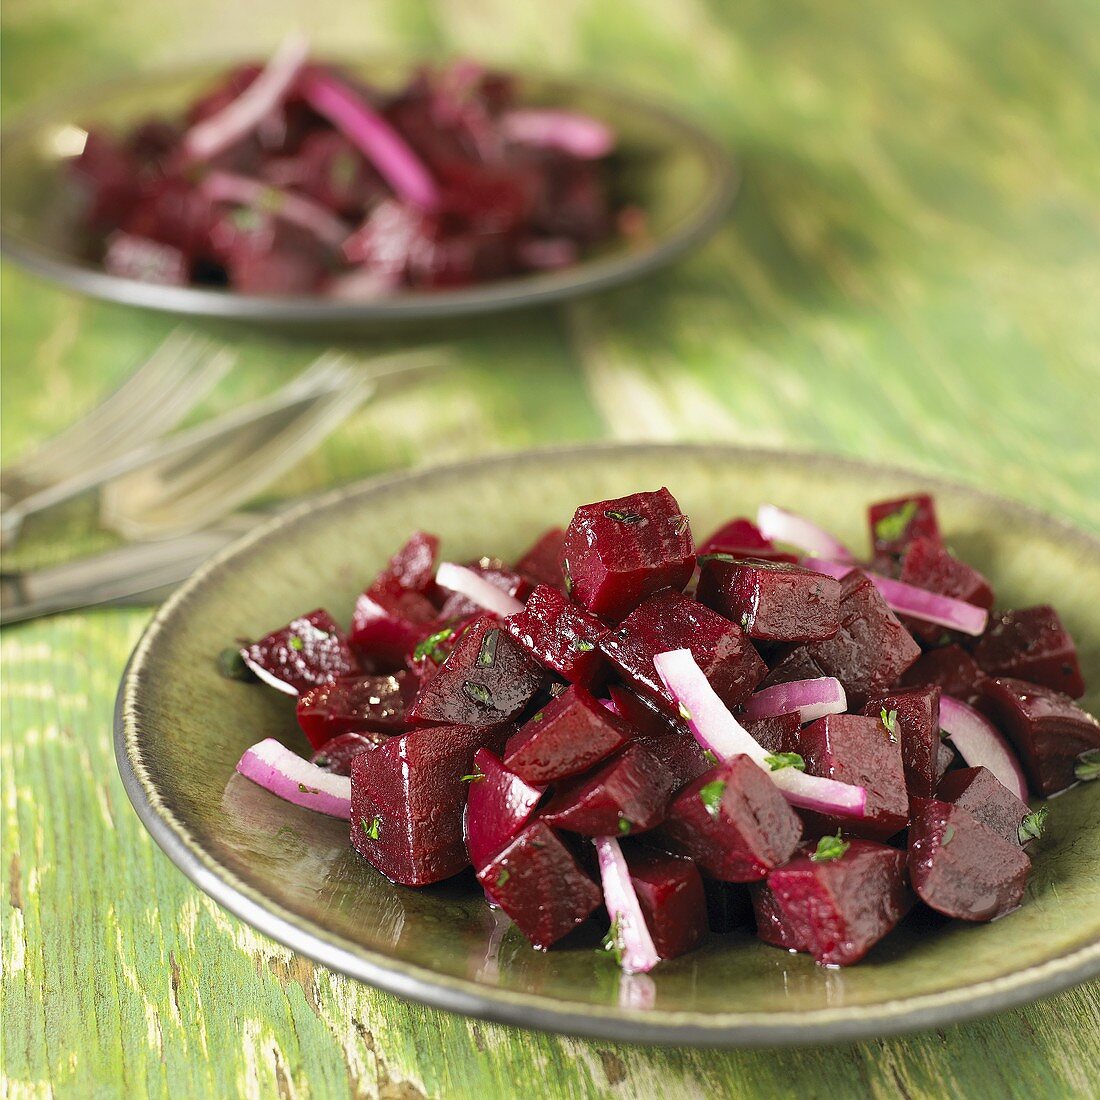 Red Beet and Red Onion Salad Served on Green Plates